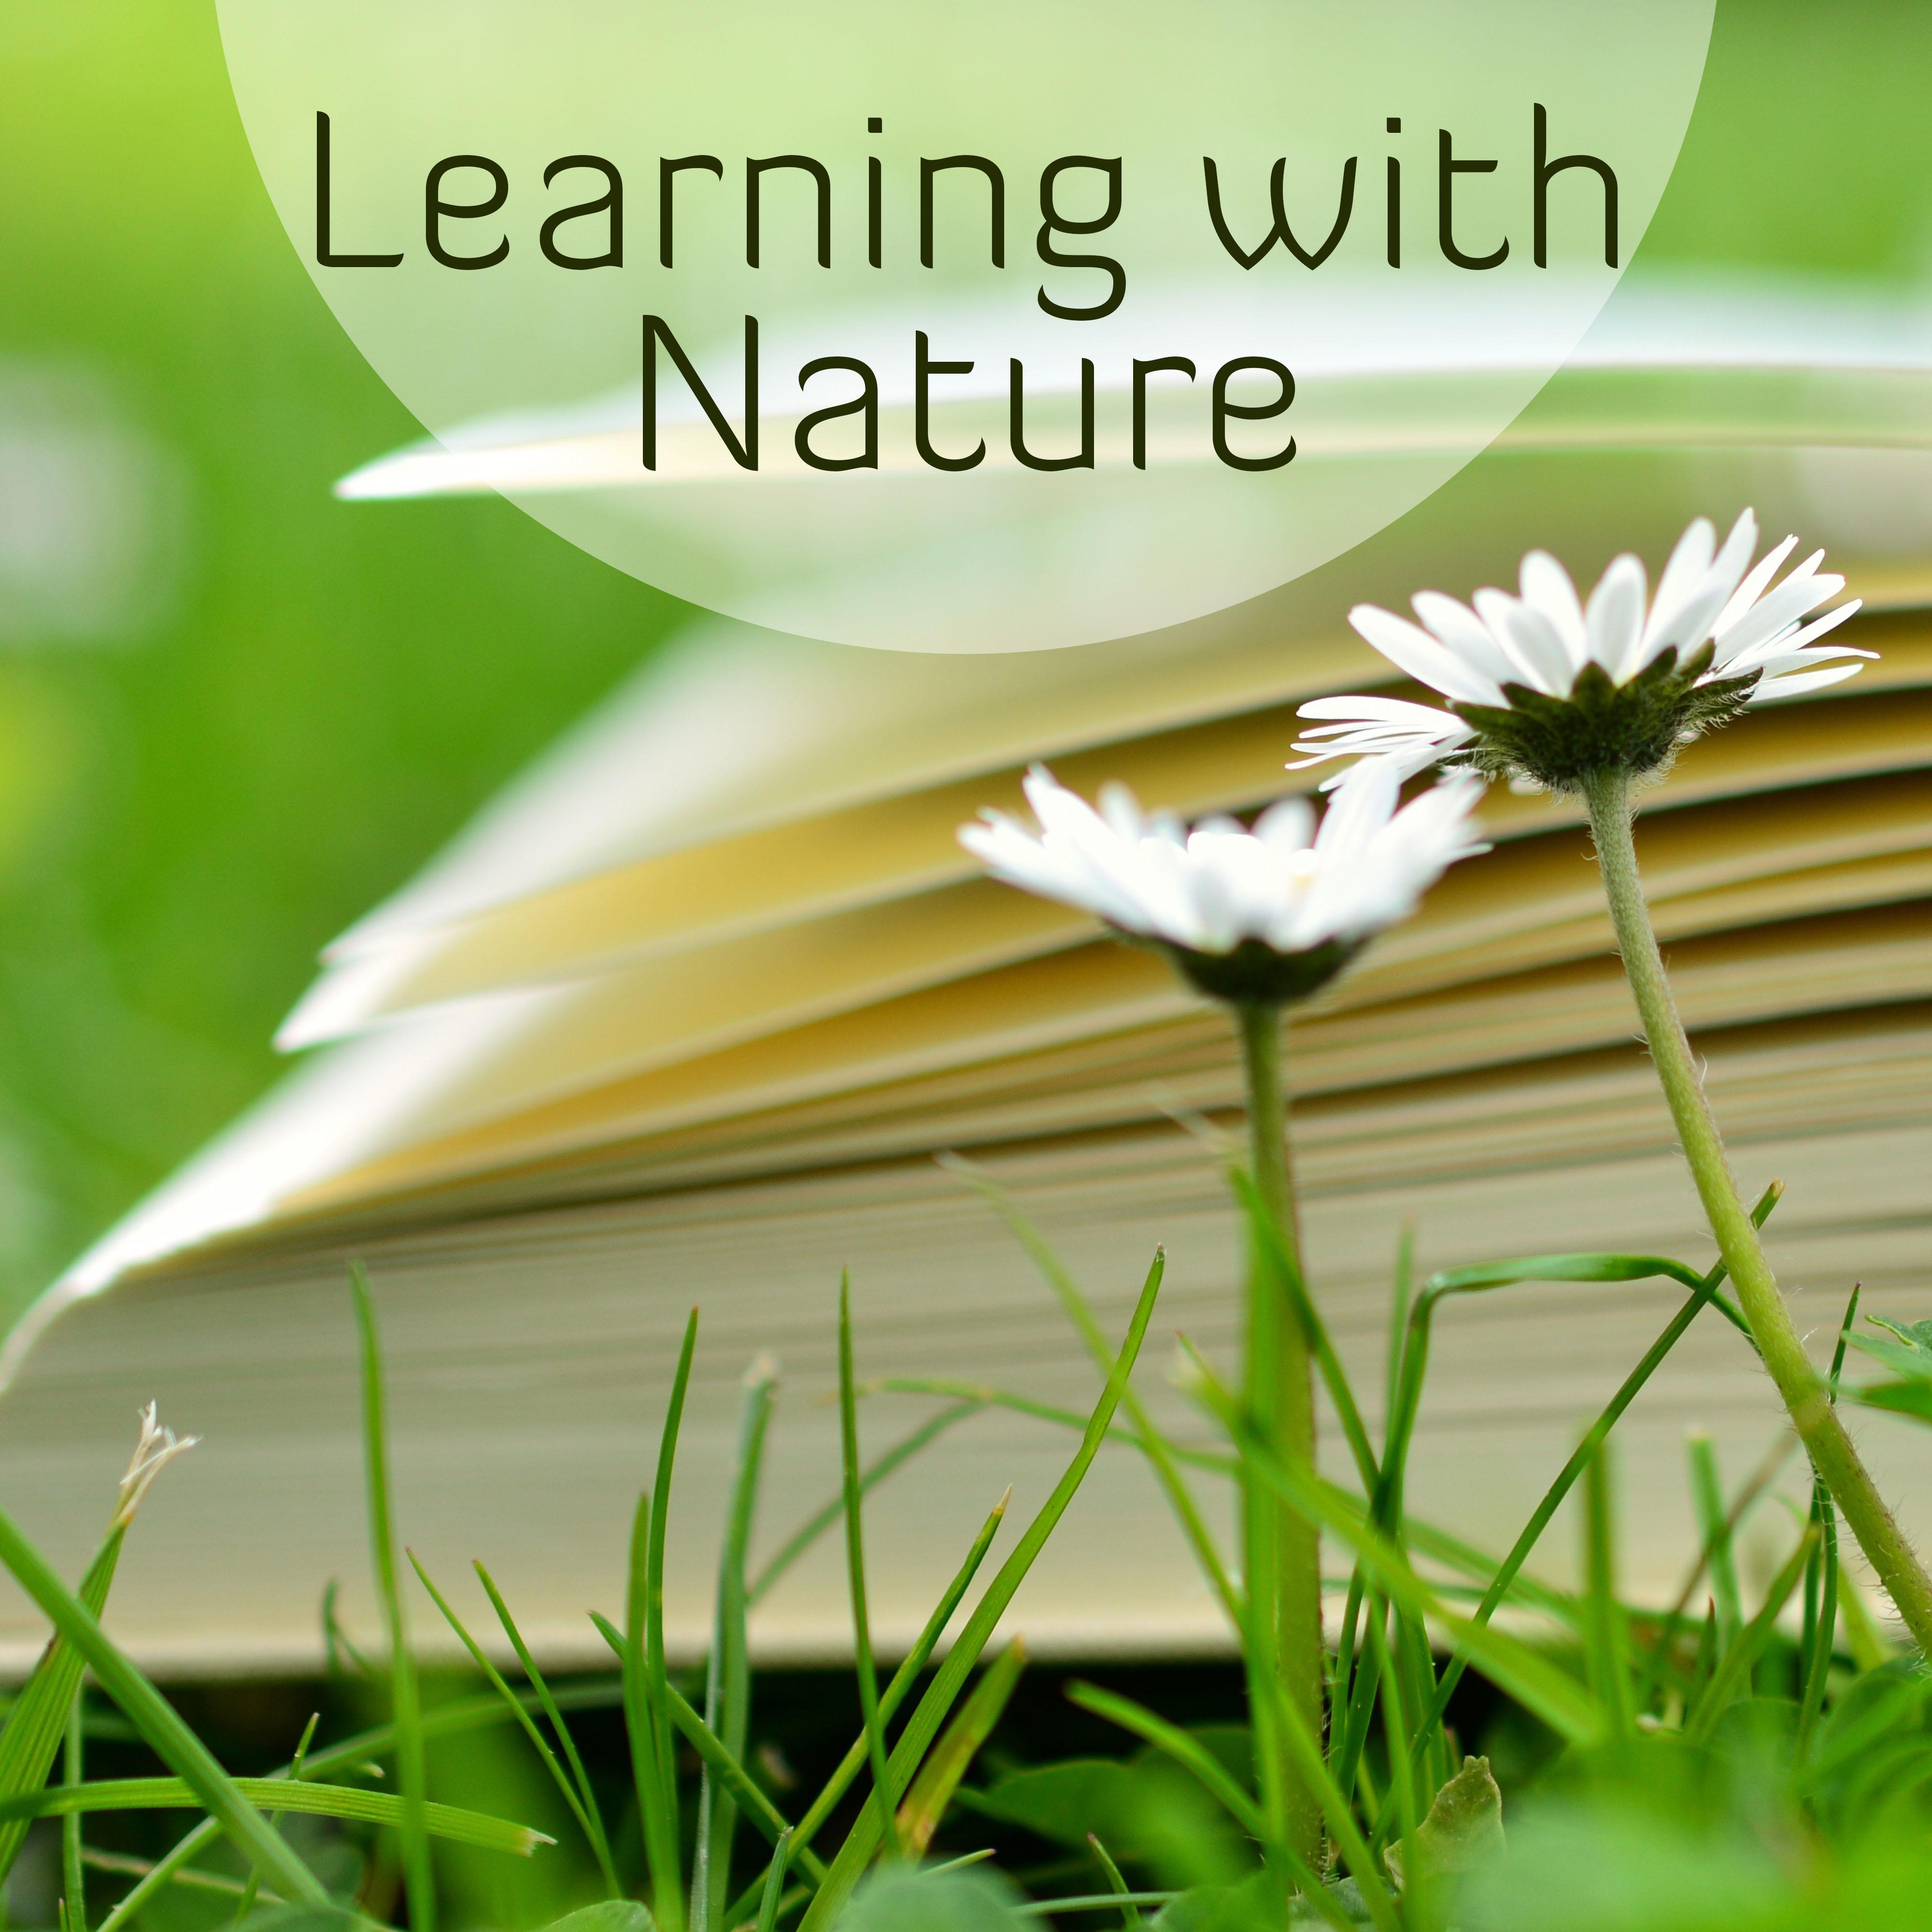 Learning with Nature – Better Memory, Deep Concentration, Study Music, Peaceful Music, Stress Relief, Brain Power, Soft Nature Sounds Help Pass Exam